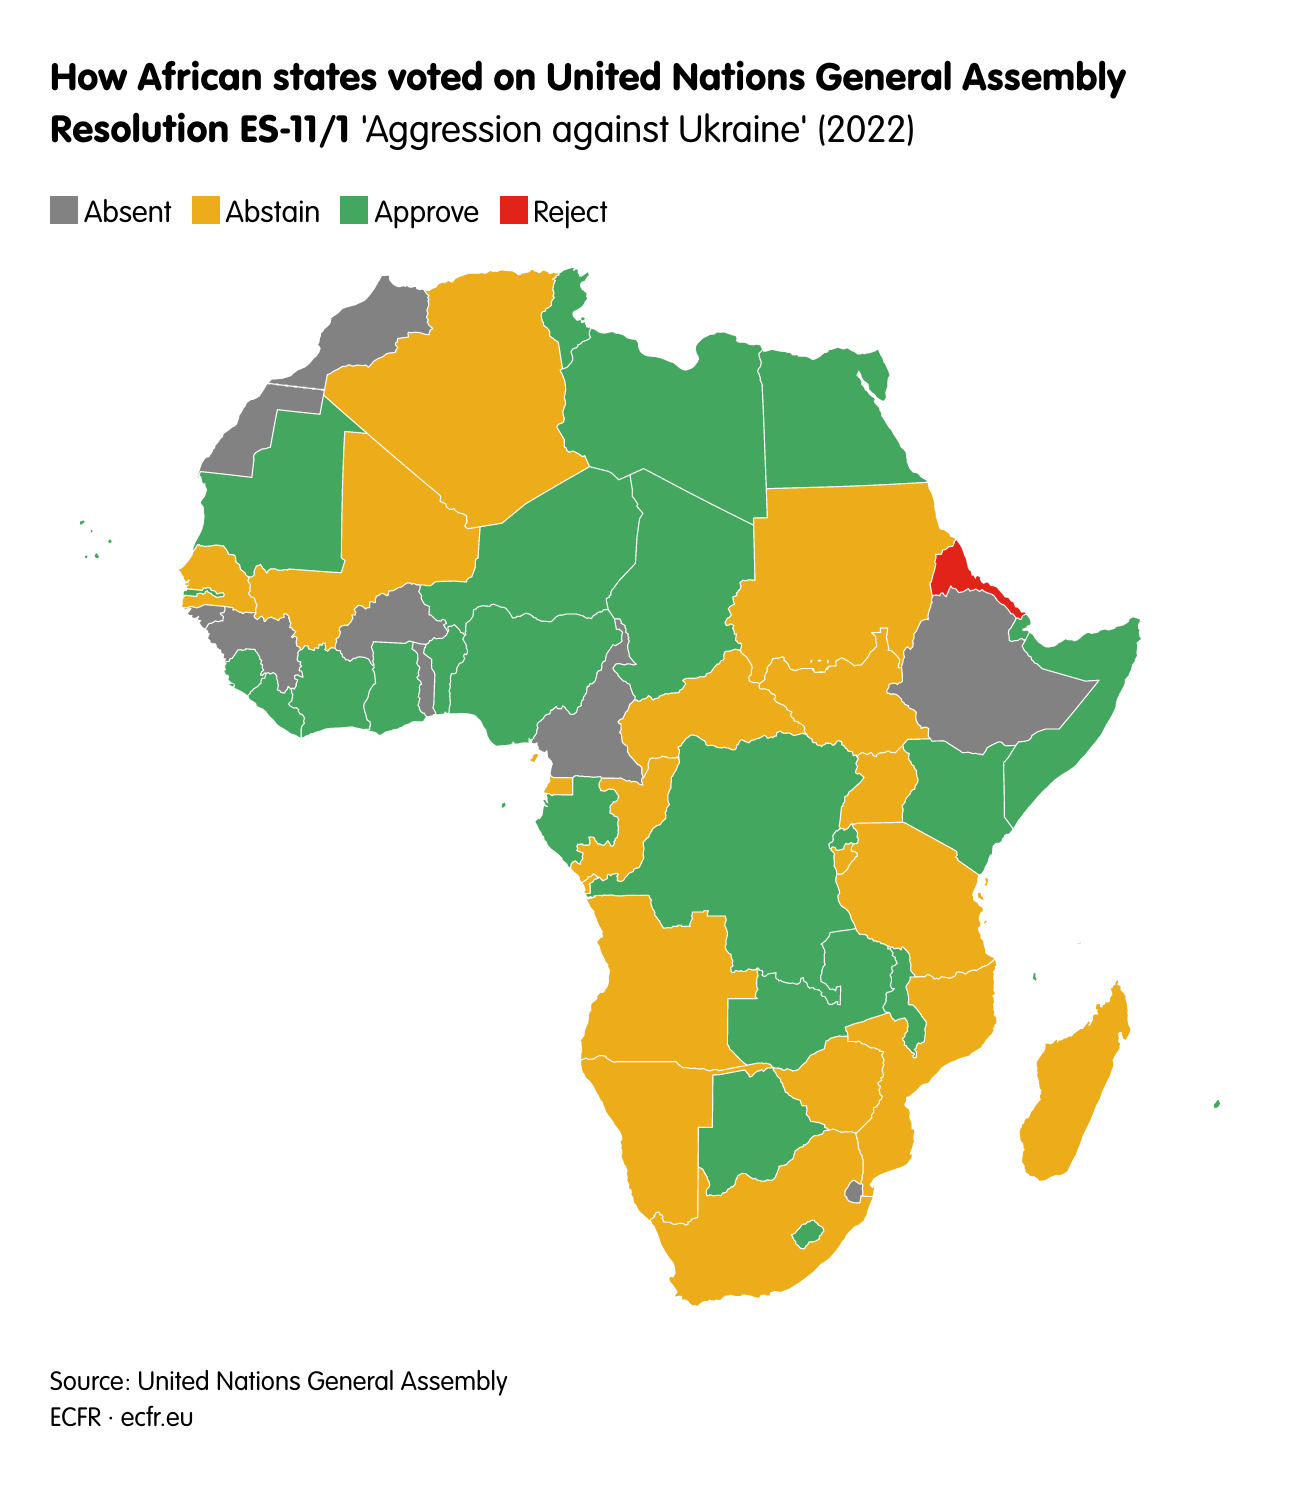 How African states voted on United Nations General Assembly Resolution ES-11/1
